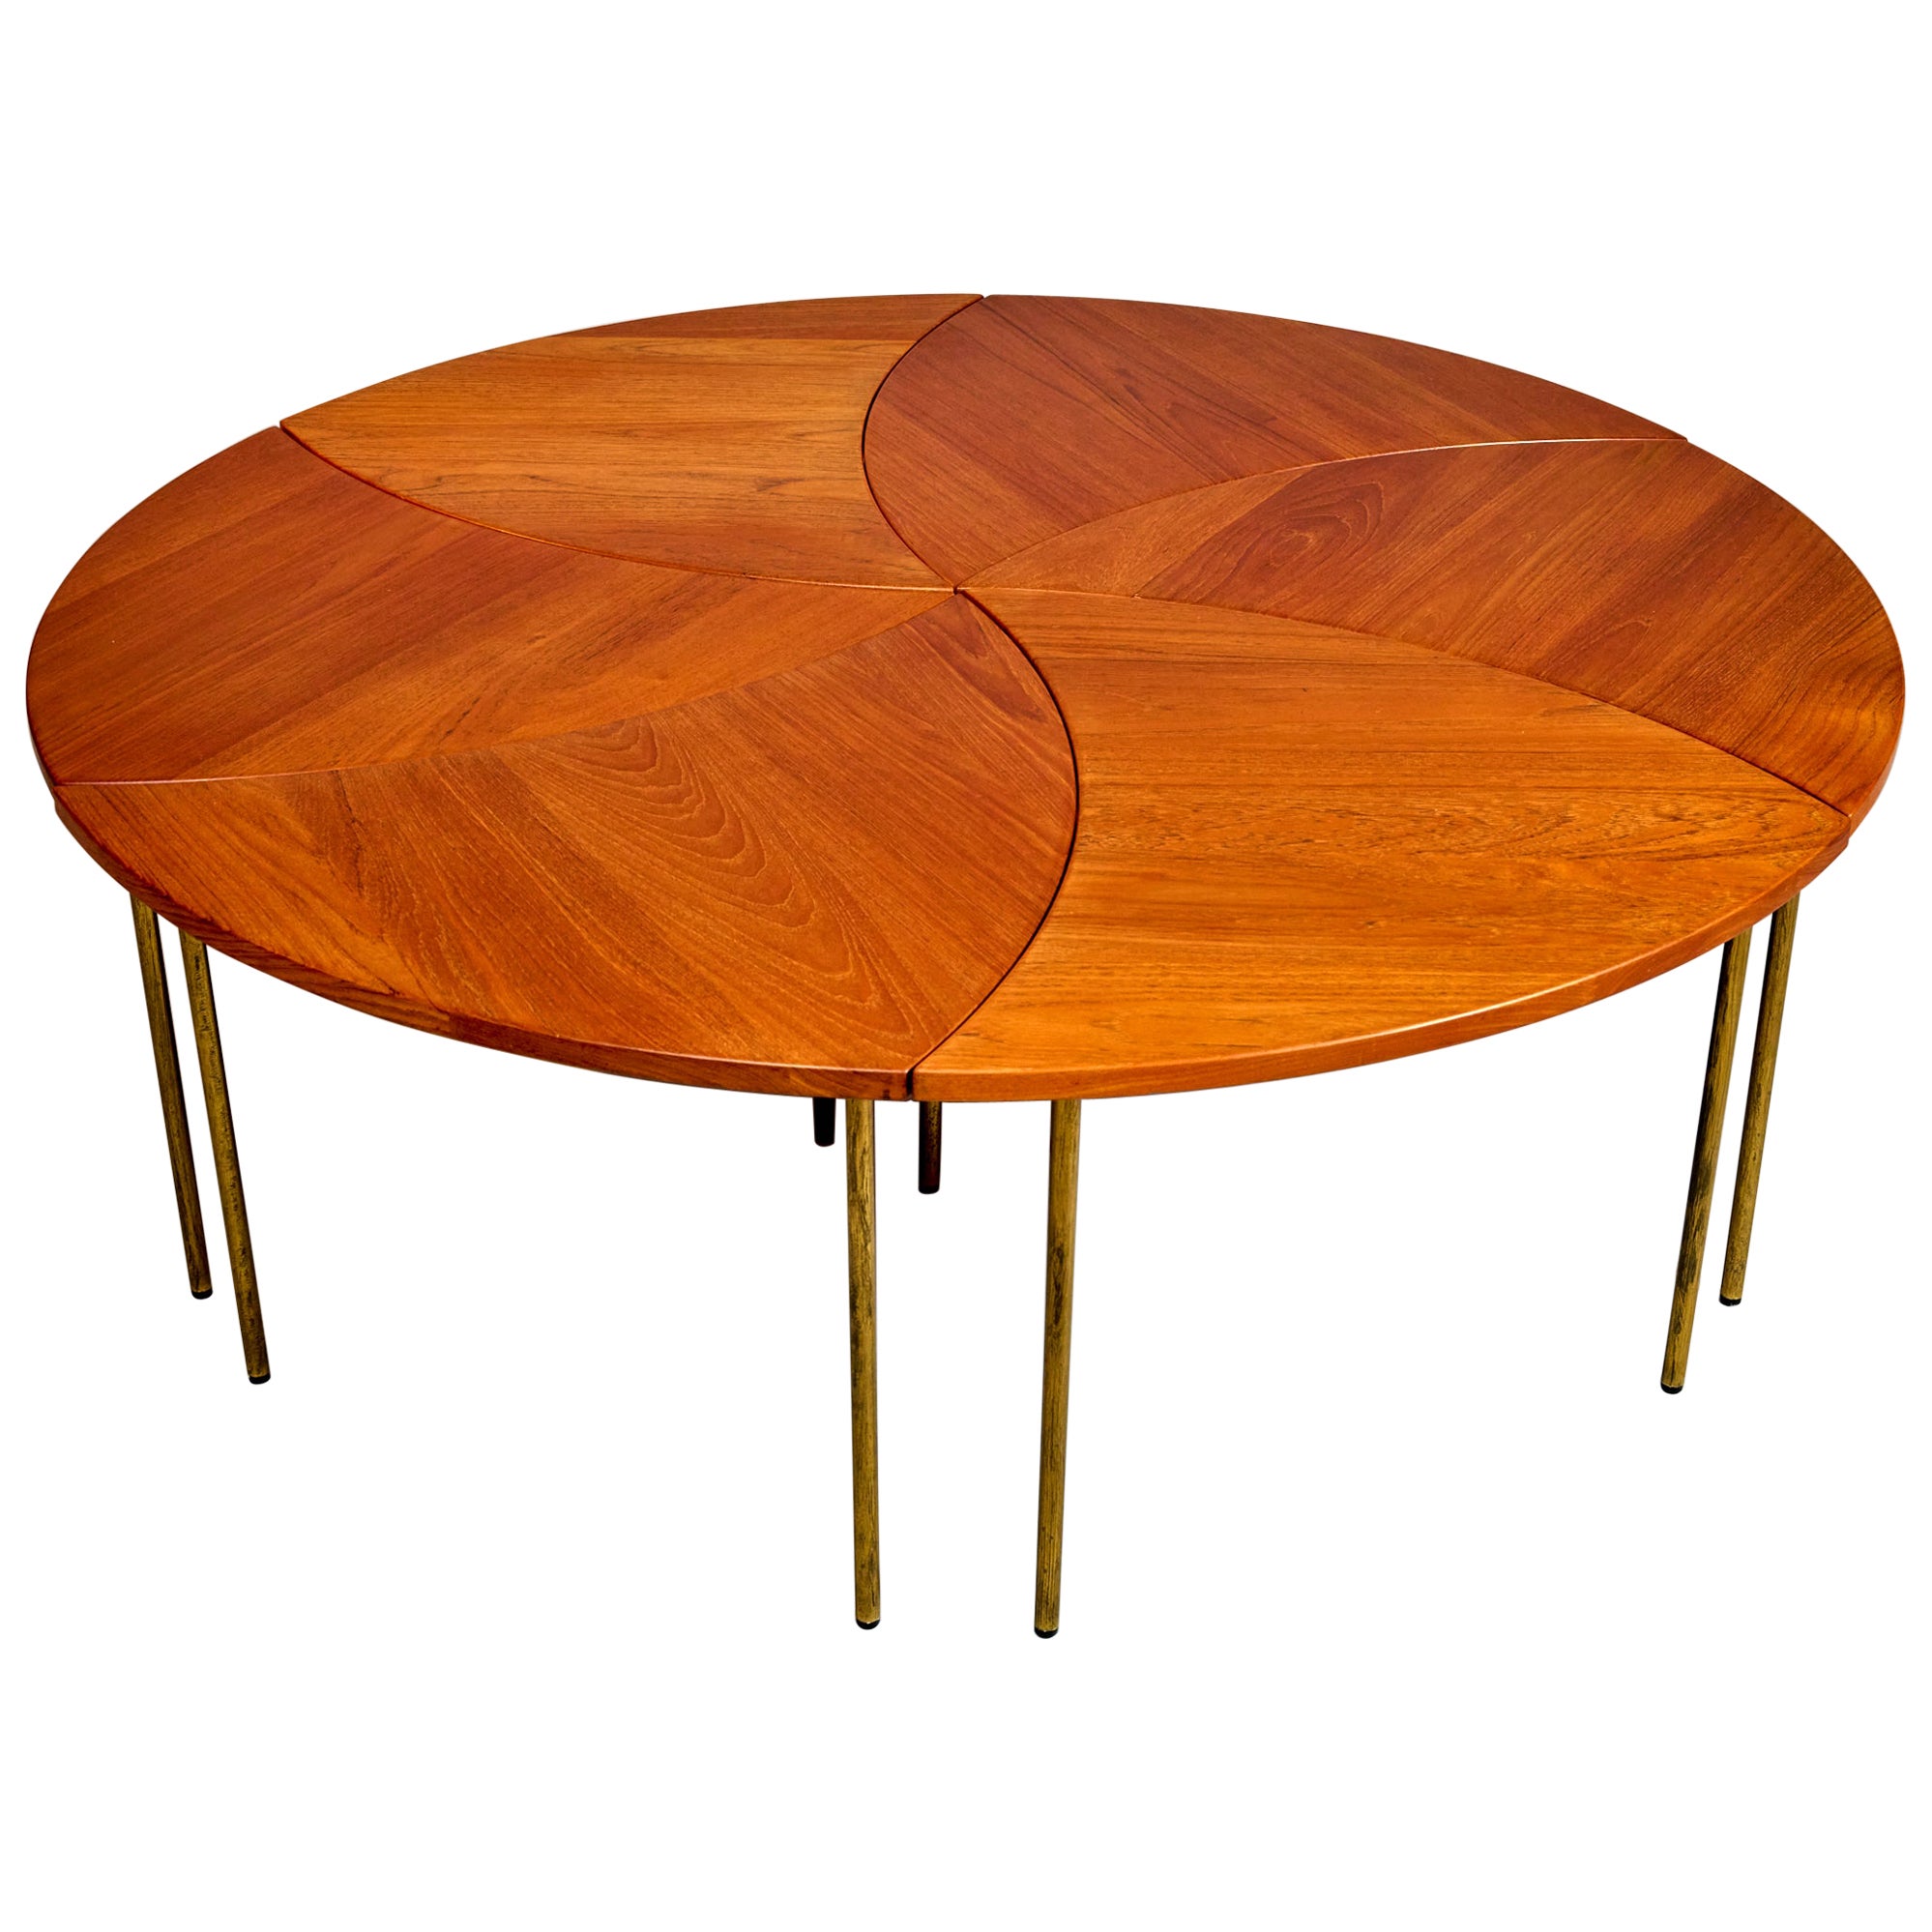 Peter Hvidt and Orla Molgaard Sectional Pinwheel Coffee Table. Denmark C1953 For Sale